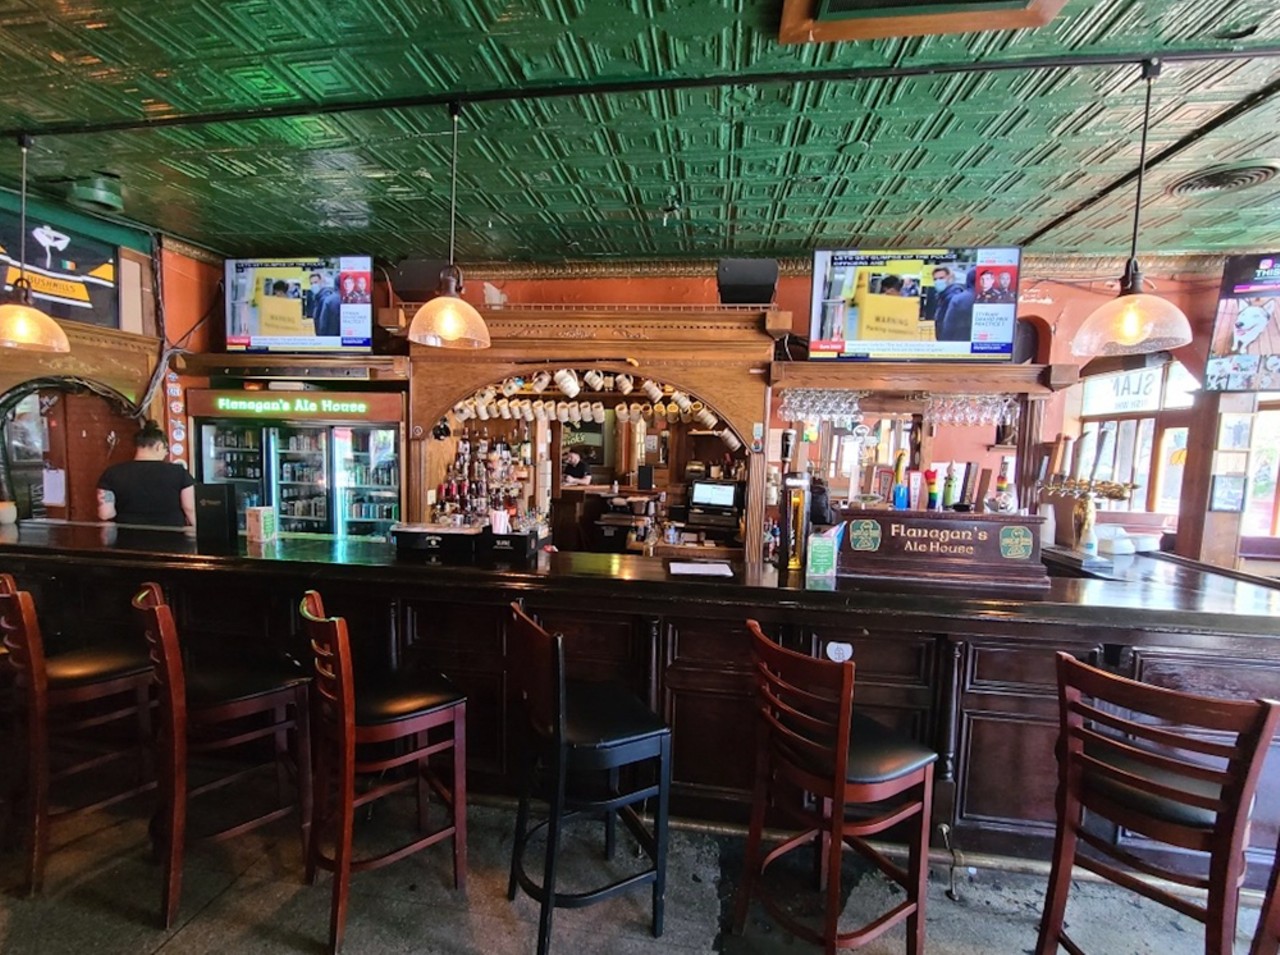  Flanagan's Ale House 
934 Baxter Ave. 
In LEO&#146;s 2022 Readers&#146; Choice Awards, this bar took home third place in &#147;Best Patio for Pets.&#148; If you&#146;d rather stay inside, they&#146;ve got weekly trivia nights and TVs for game day.